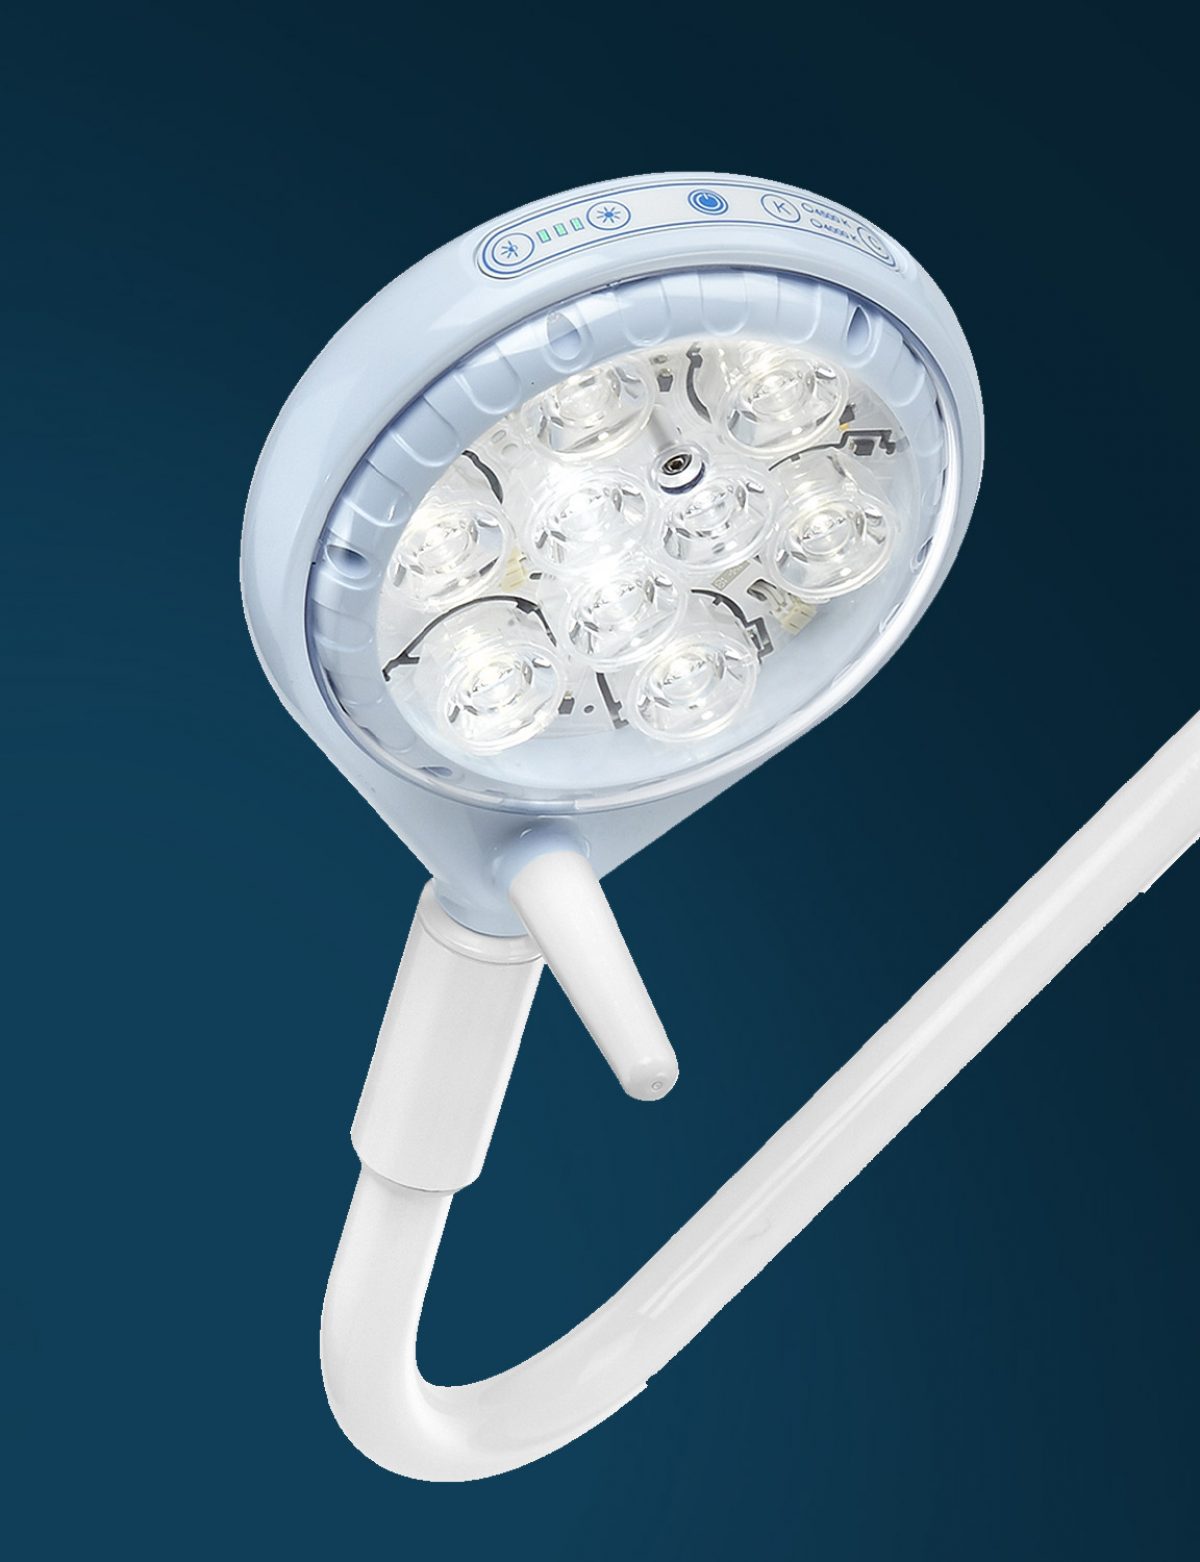 The Saturno-led operating lamp, which generates no shadows, is suitable for small surface surgeries, gynaecology and first aid.